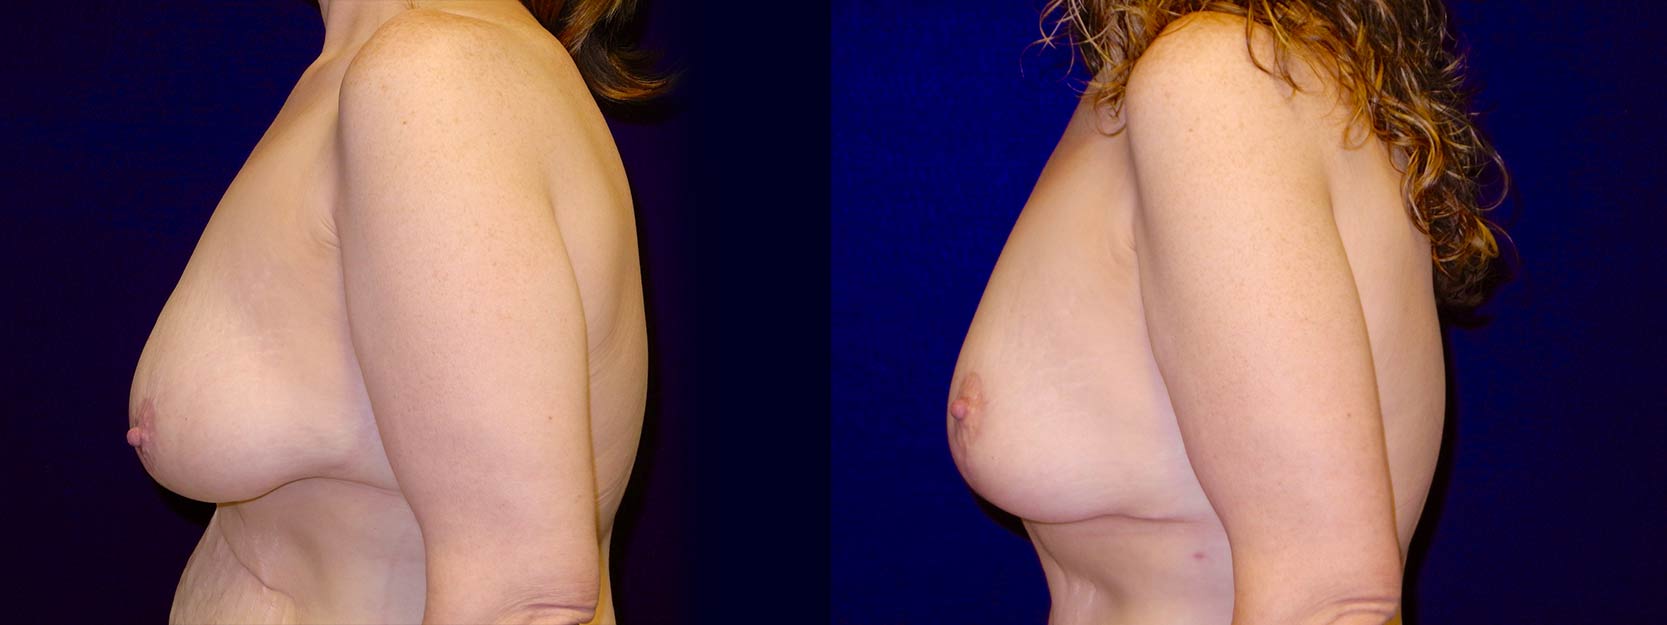 Left Profile View - Breast Lift After Weight Loss